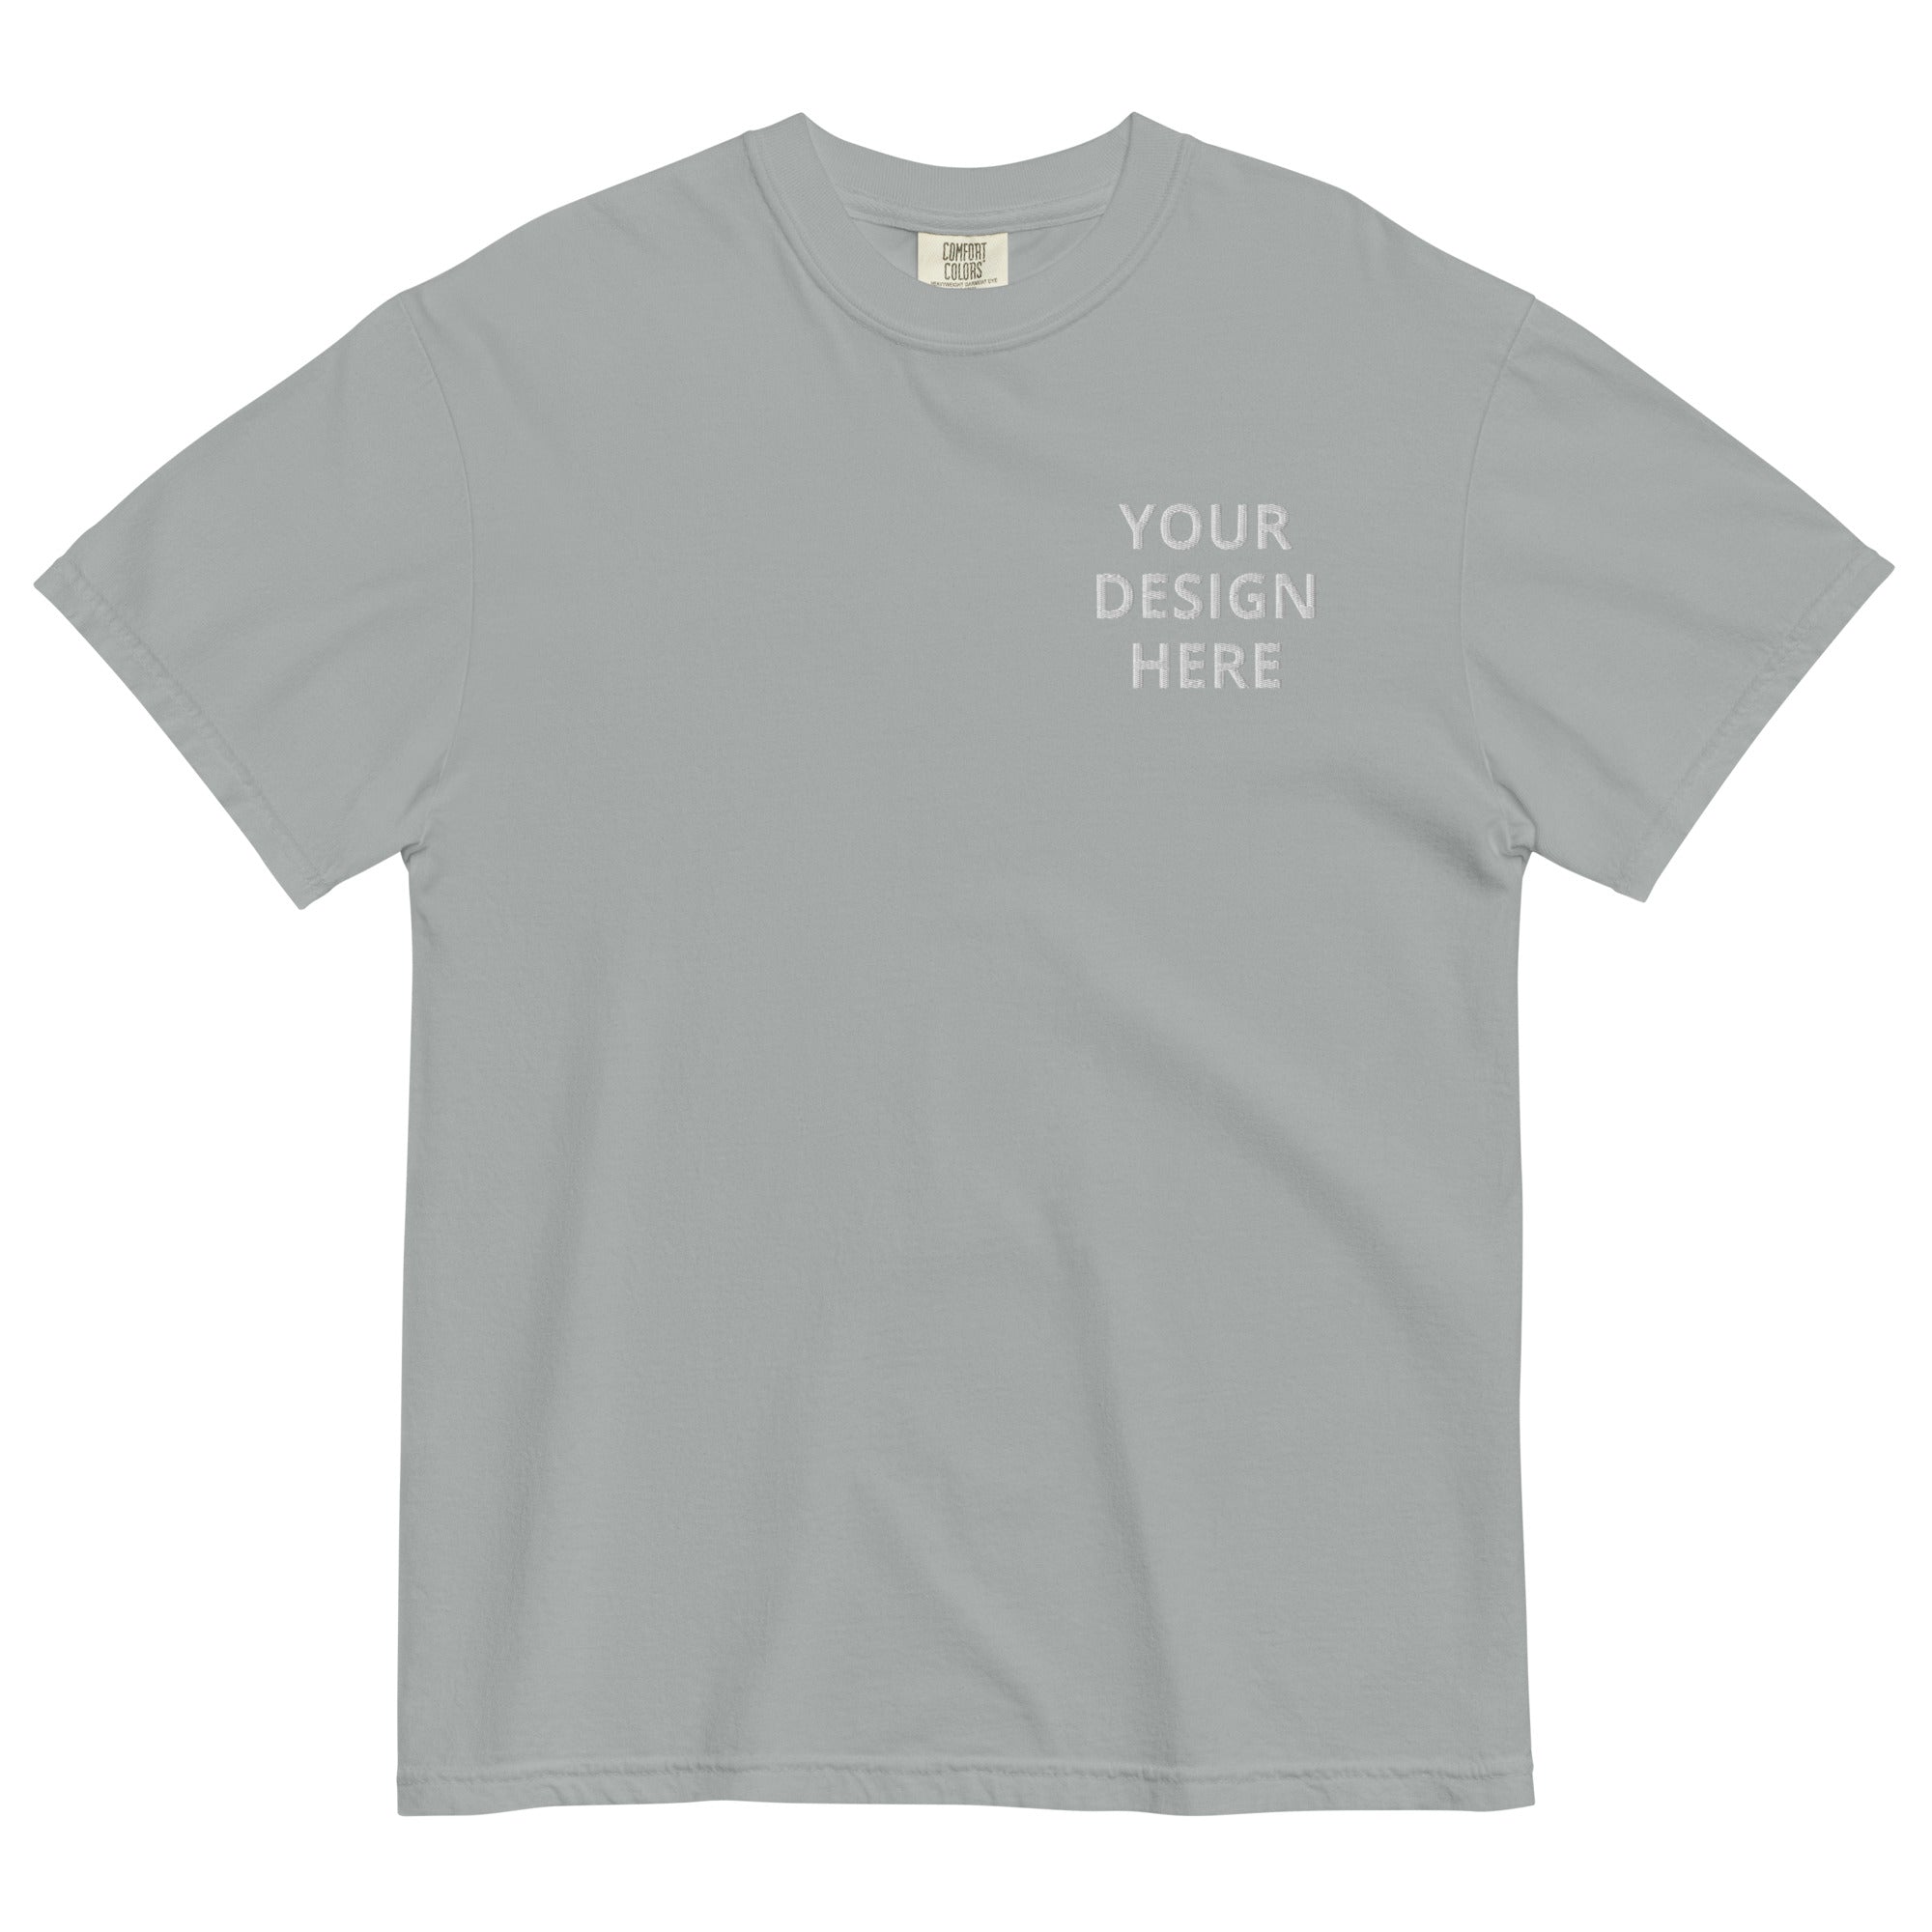 CUSTOM EMBROIDERED COMFORT COLORS T-SHIRT